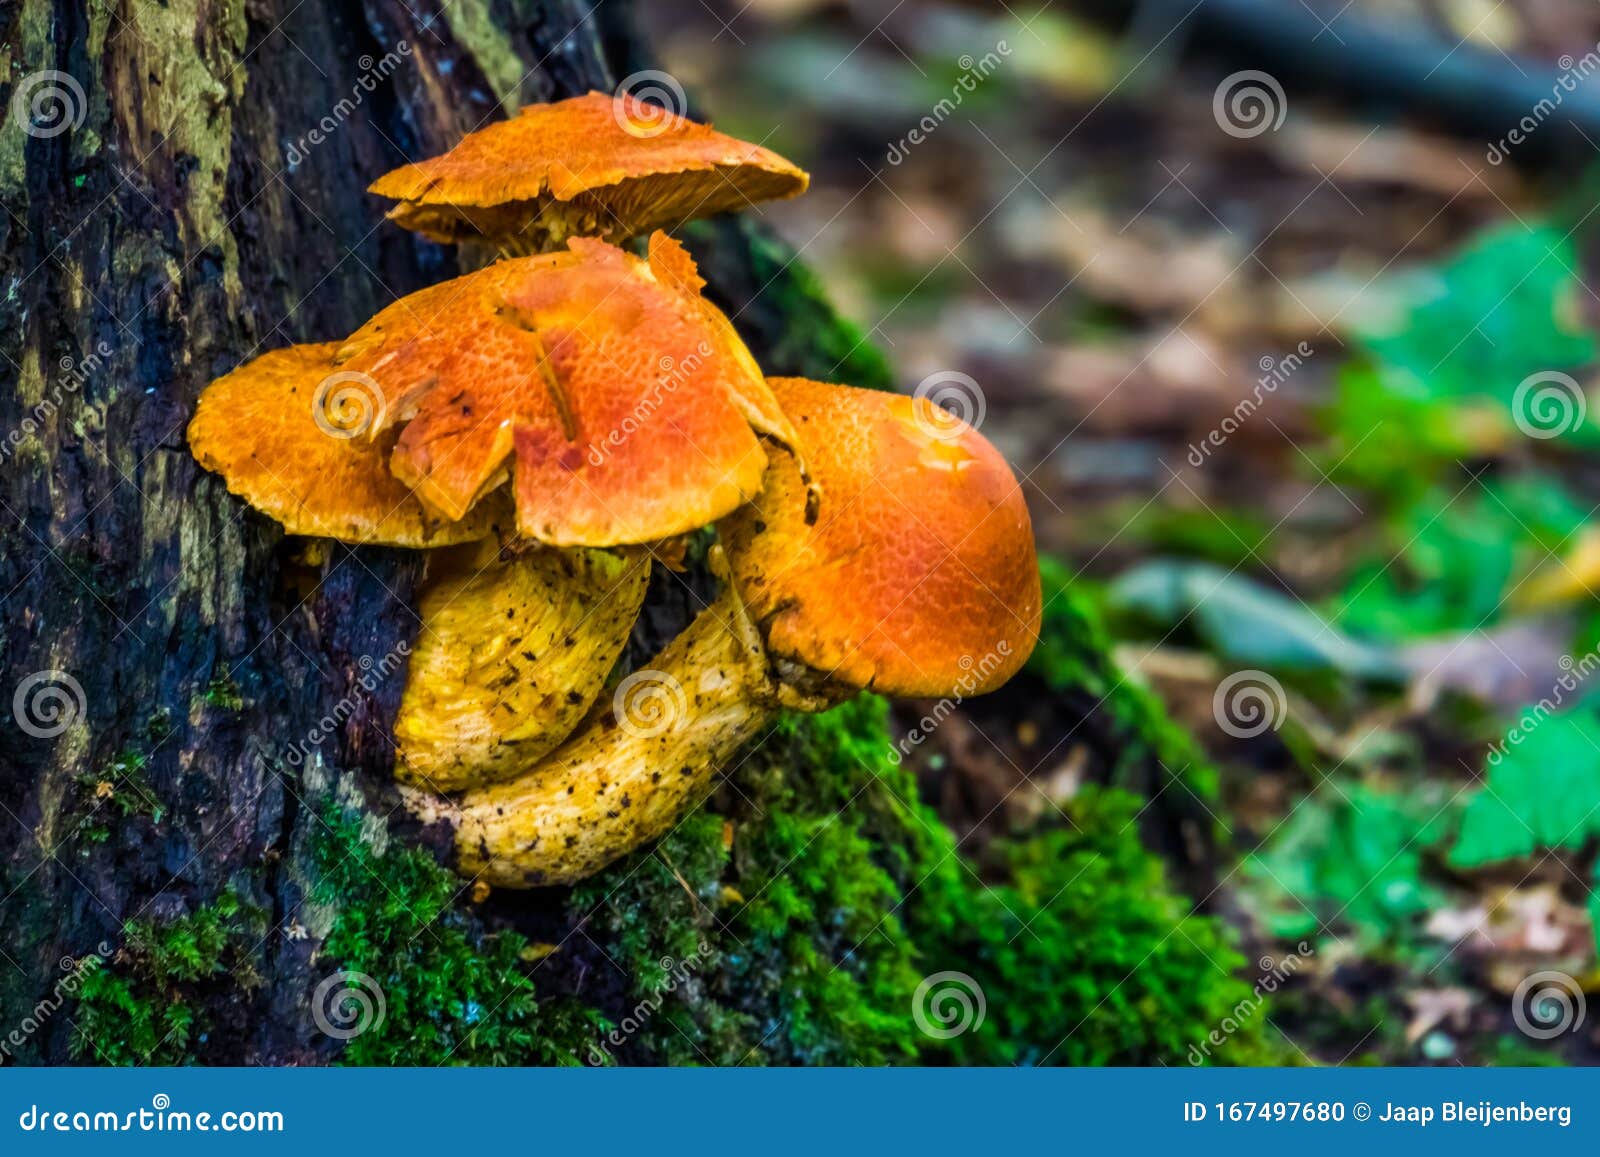 grevilles mushrooms in macro closeup, edible fungus specie from the forests of europe